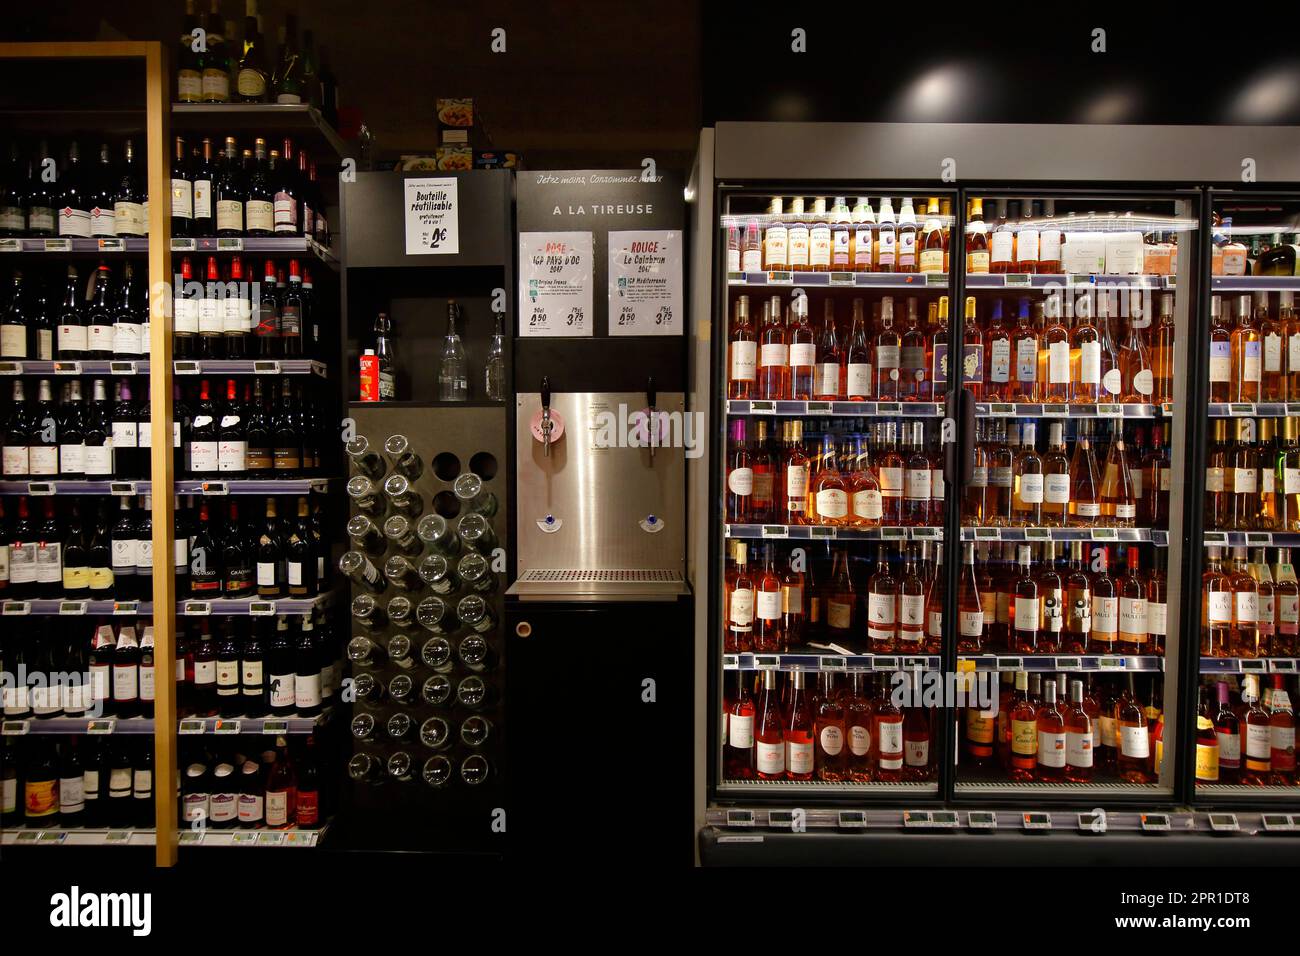 Organic wines on tap, or draft wines, and reusable wine bottles, at a supermarket in Paris, France. Le vin à la tireuse. Stock Photo